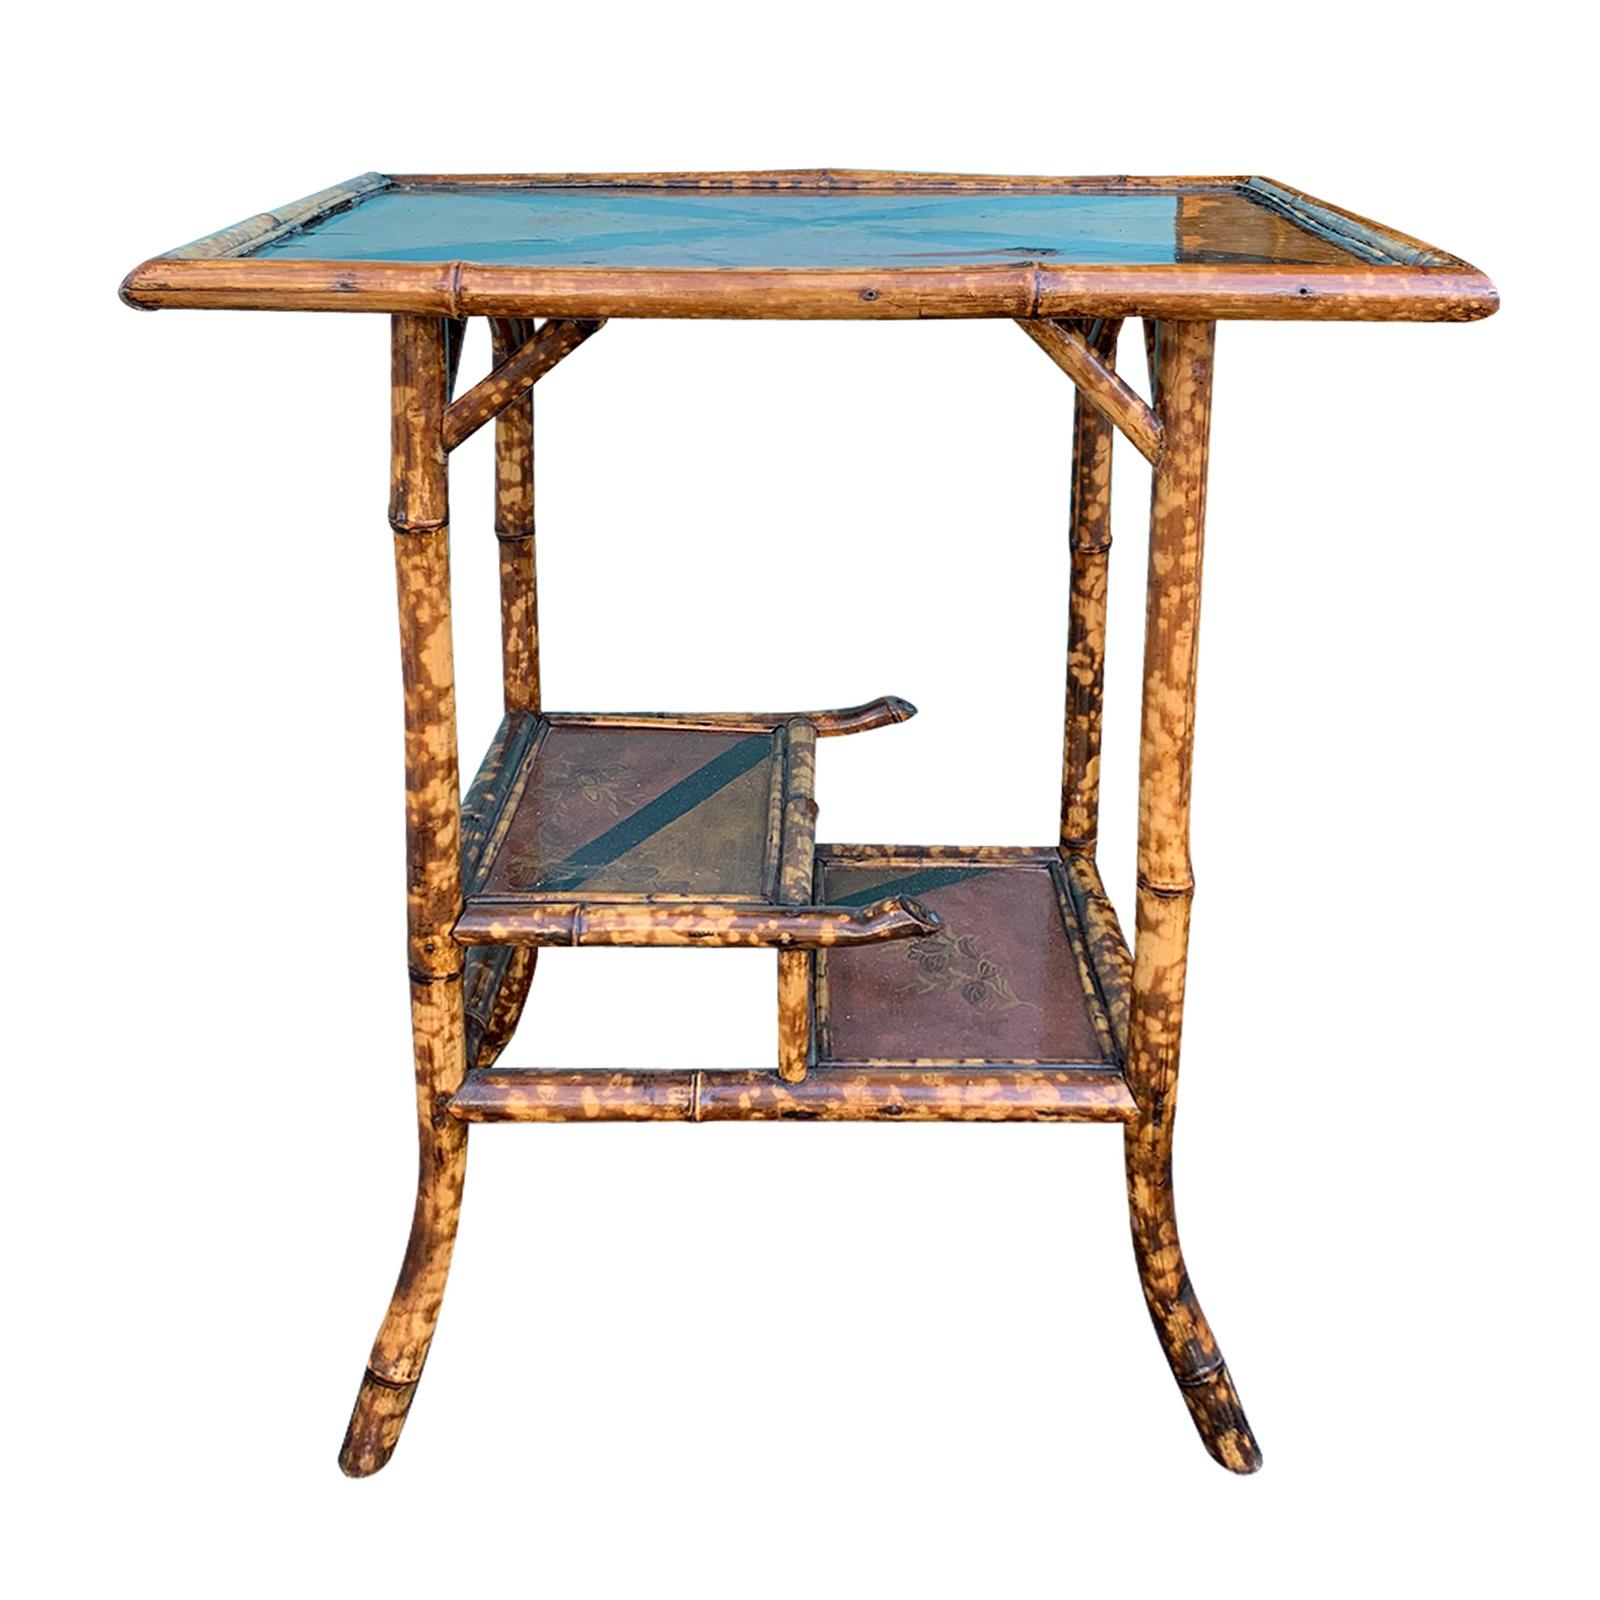 Late 19th-Early 20th Century Bamboo Side Table with Tiered Shelves